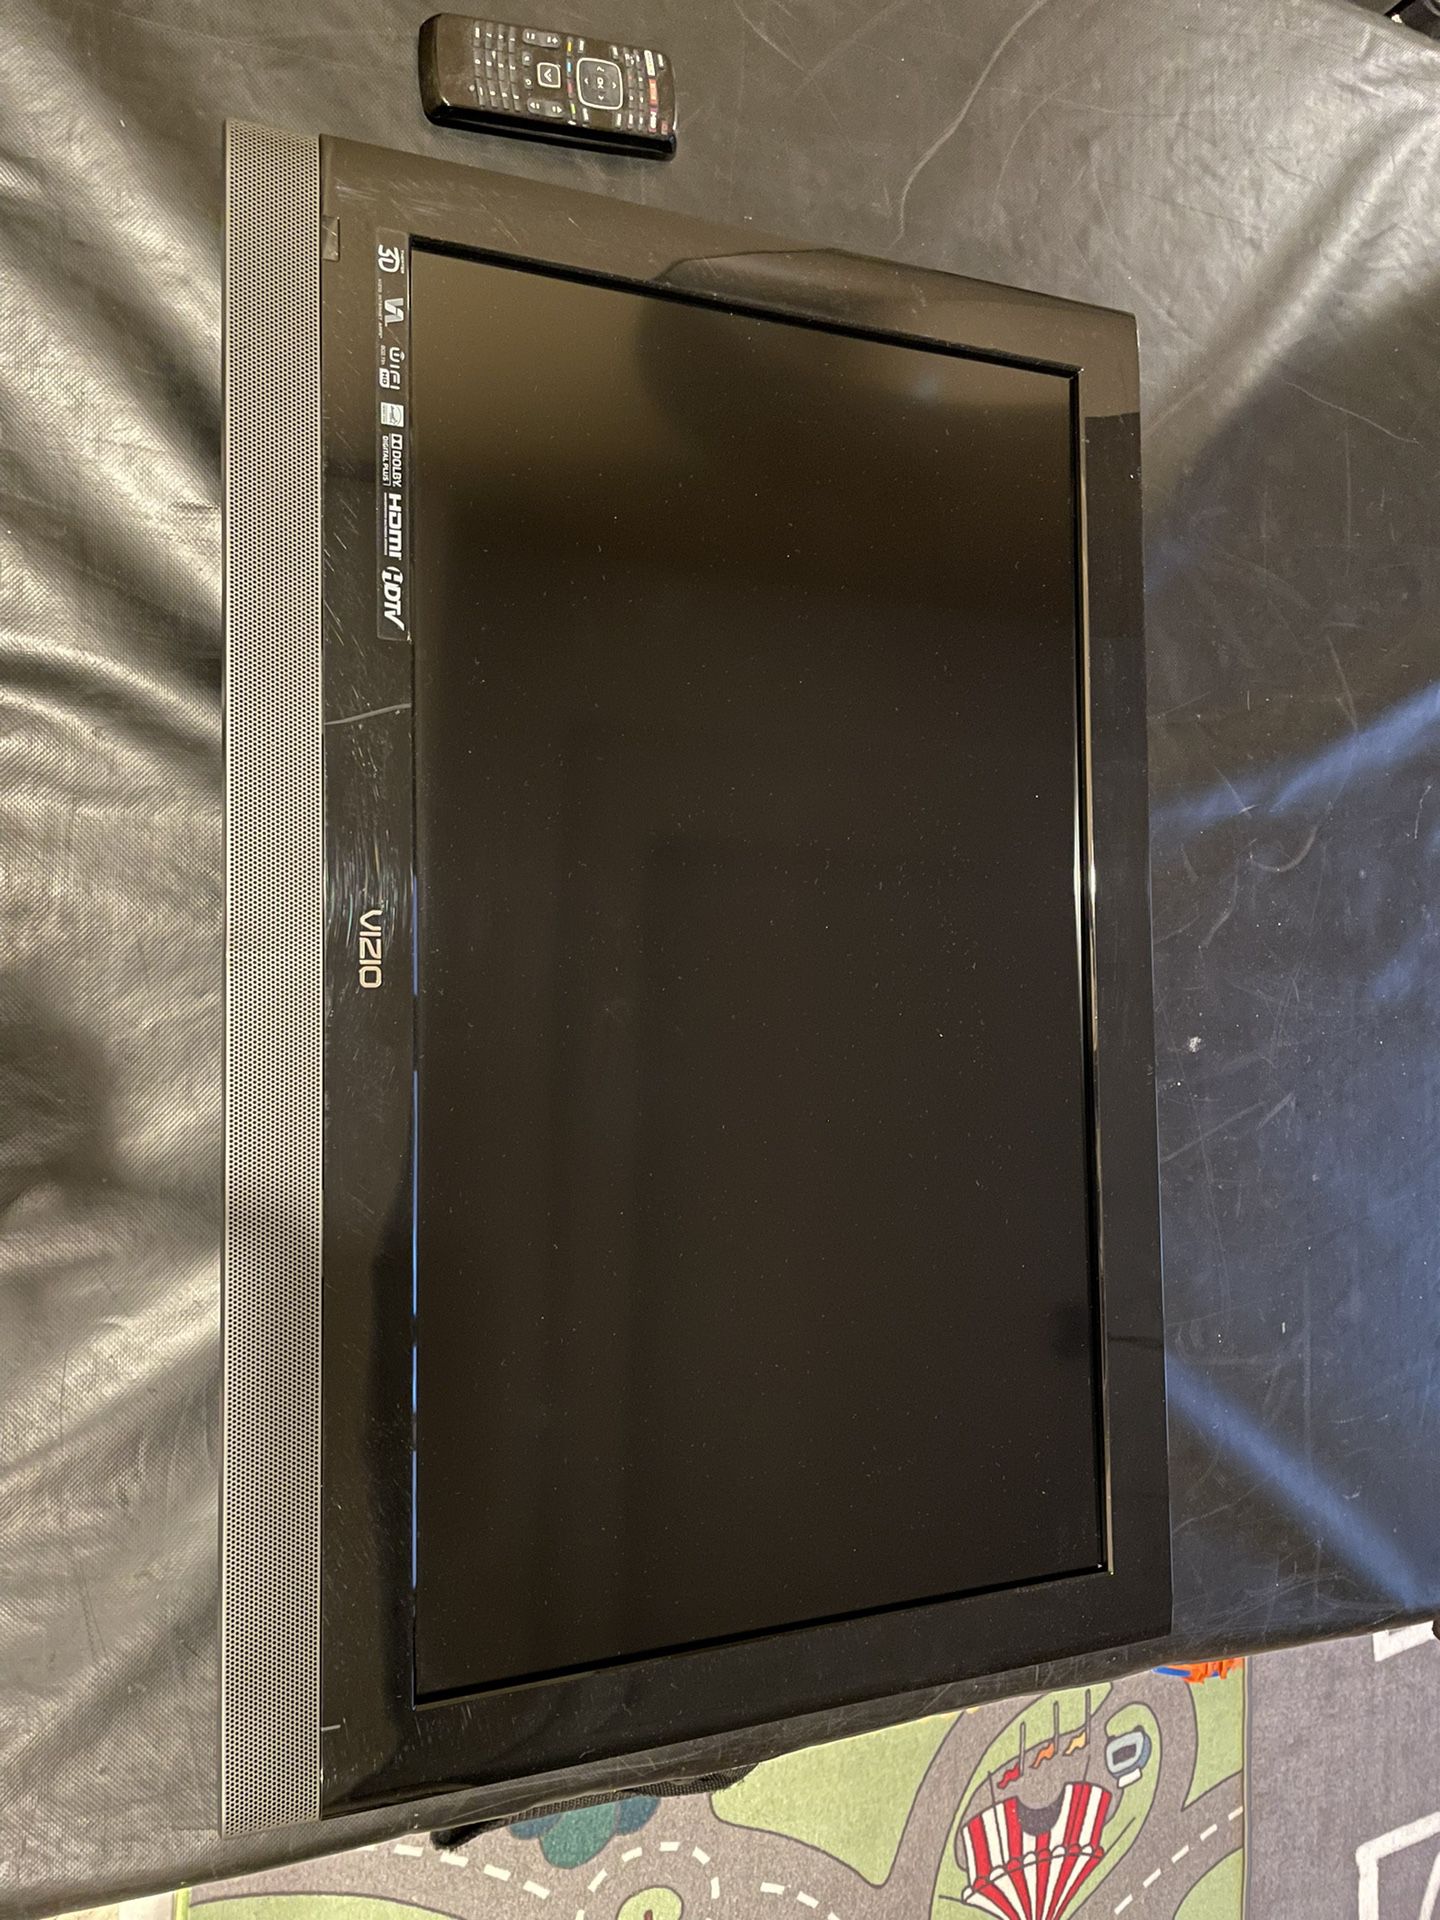 VIZIO Tv 32 Inch With Wall Mount 